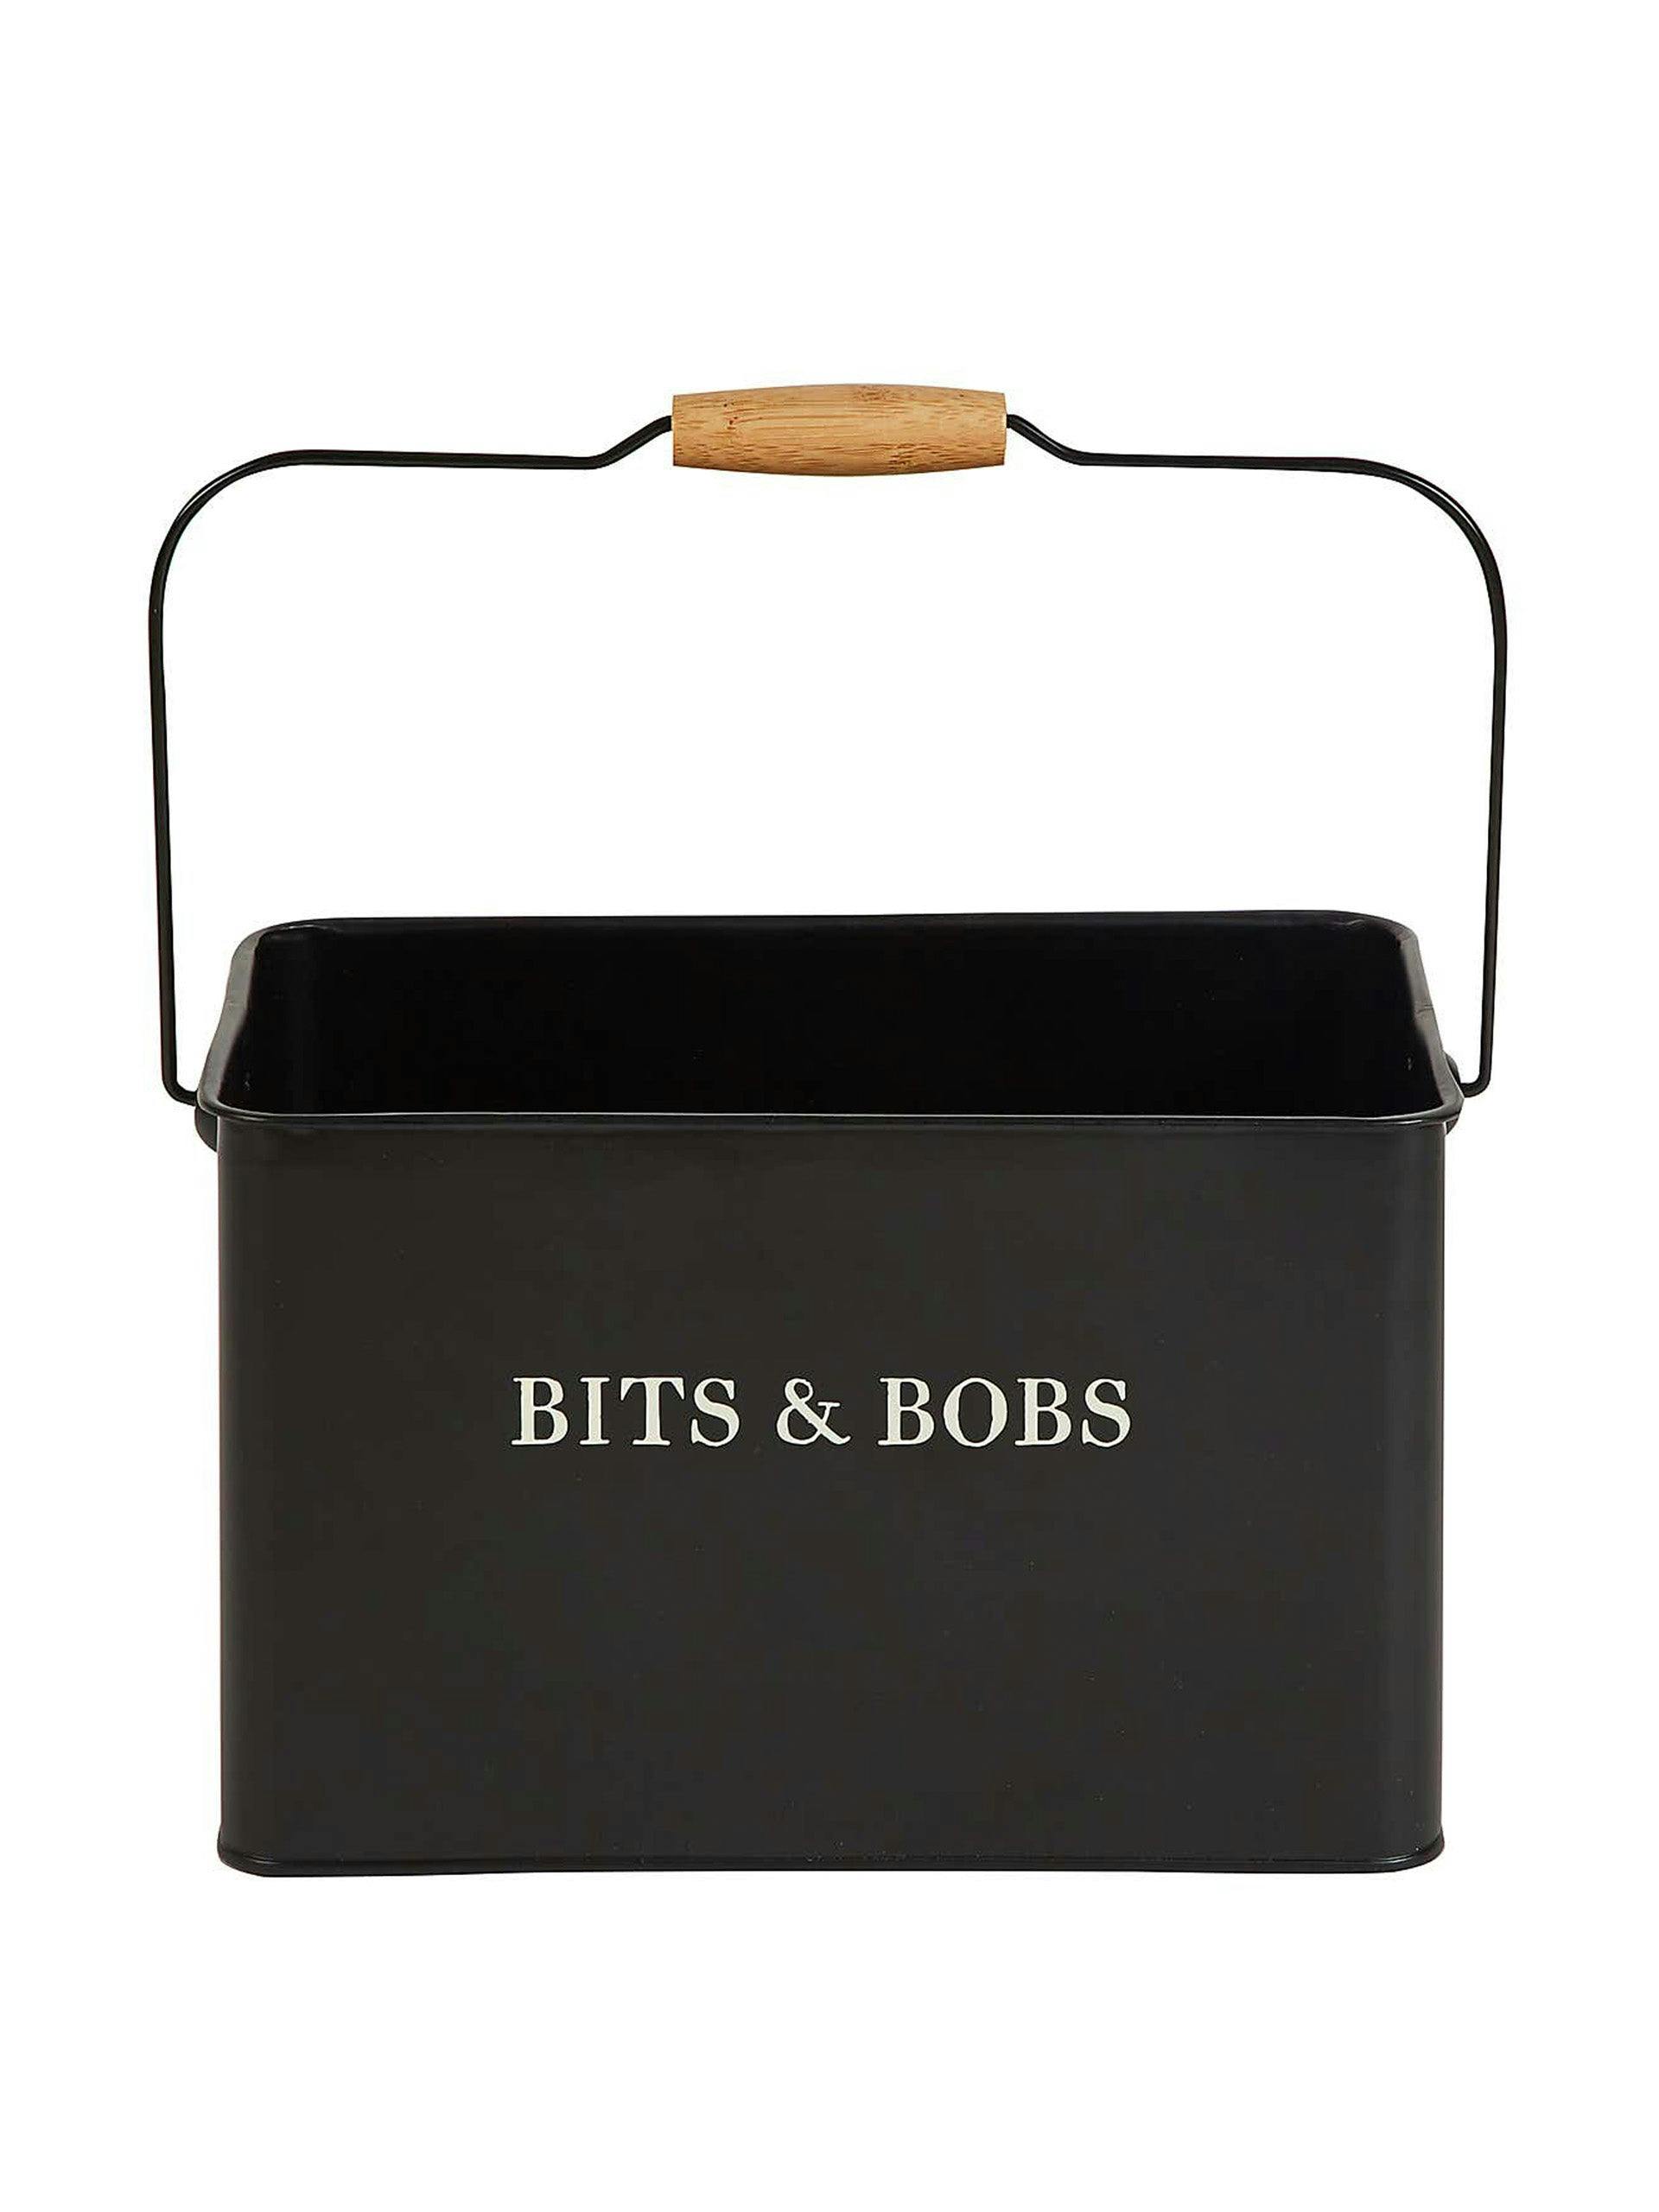 Wooden bits and bobs caddy